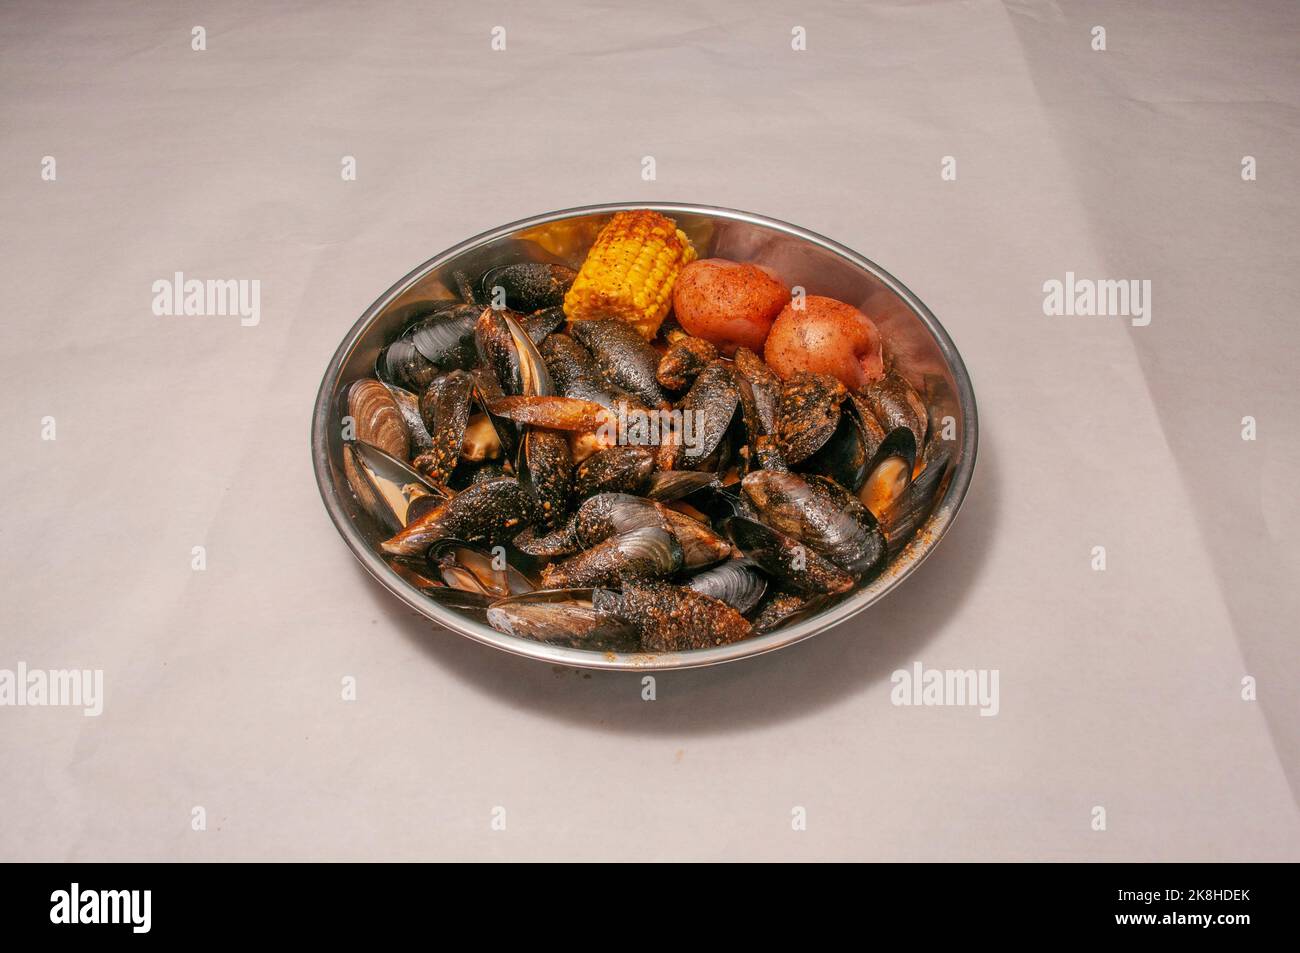 Delectable seafood delicacy known as black mussels Stock Photo